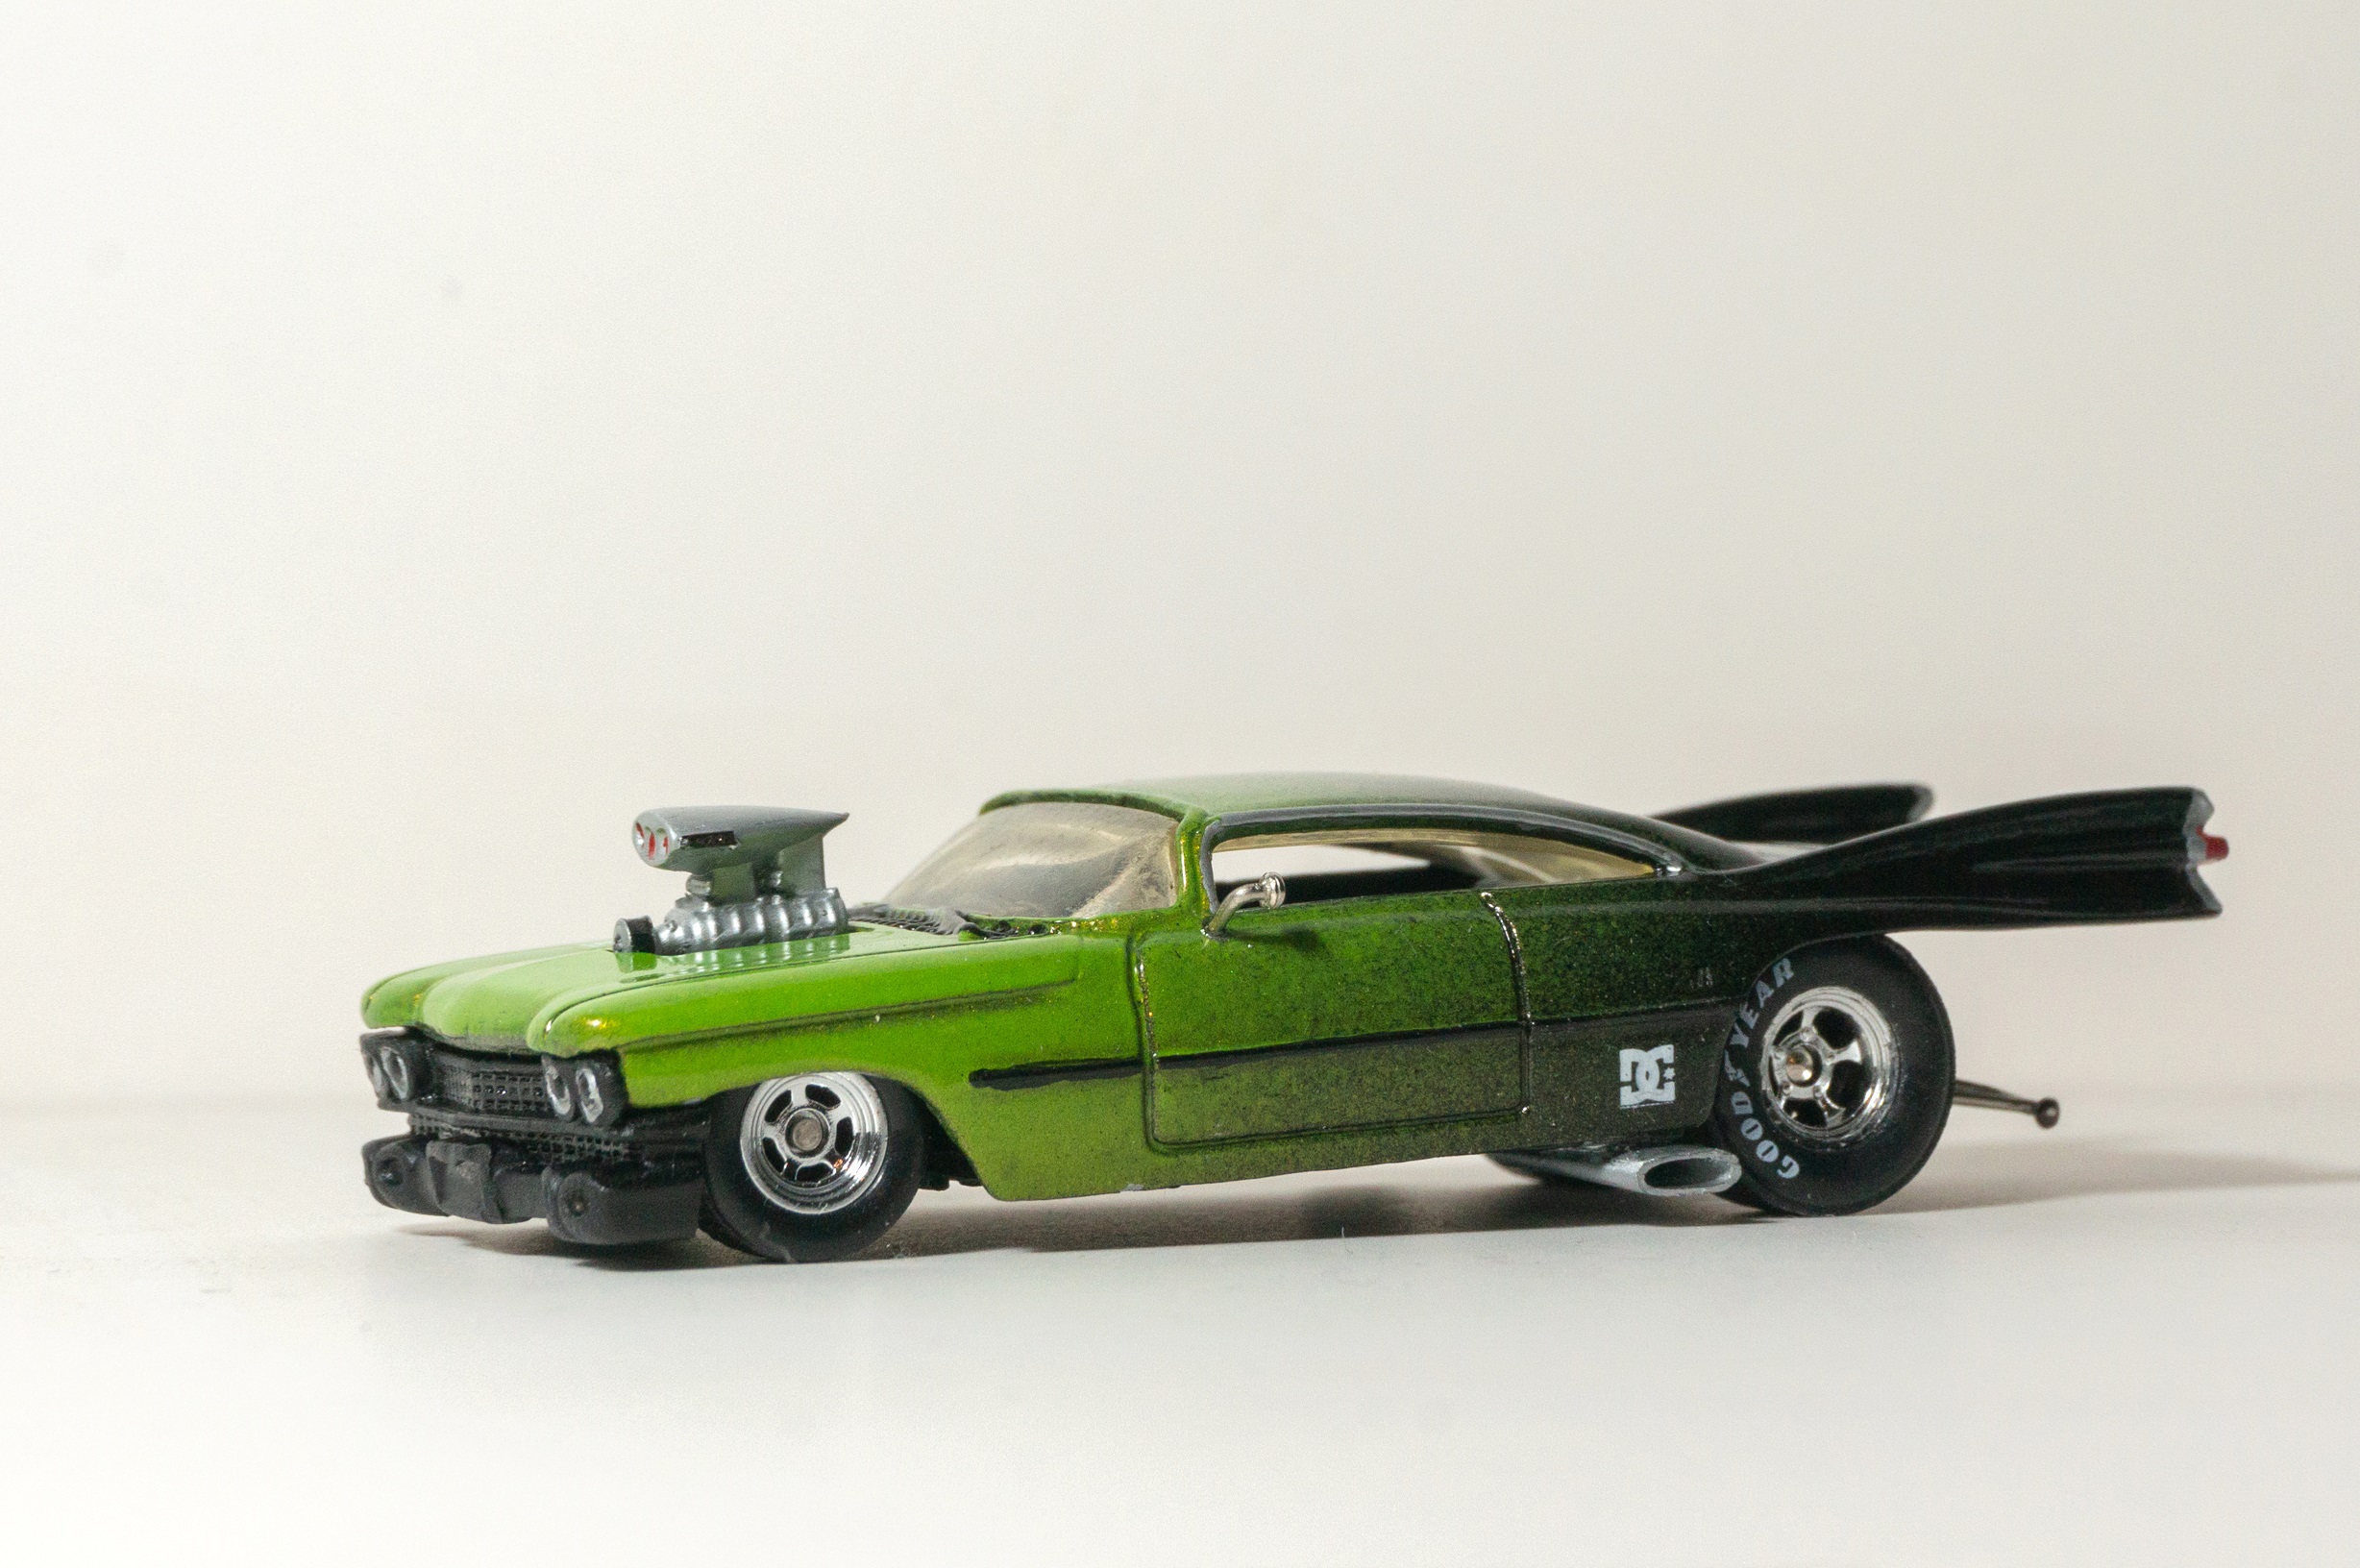 Indonesian Man Brings Joy to the World, One Custom Hot Wheels Car at a Time  - autoevolution